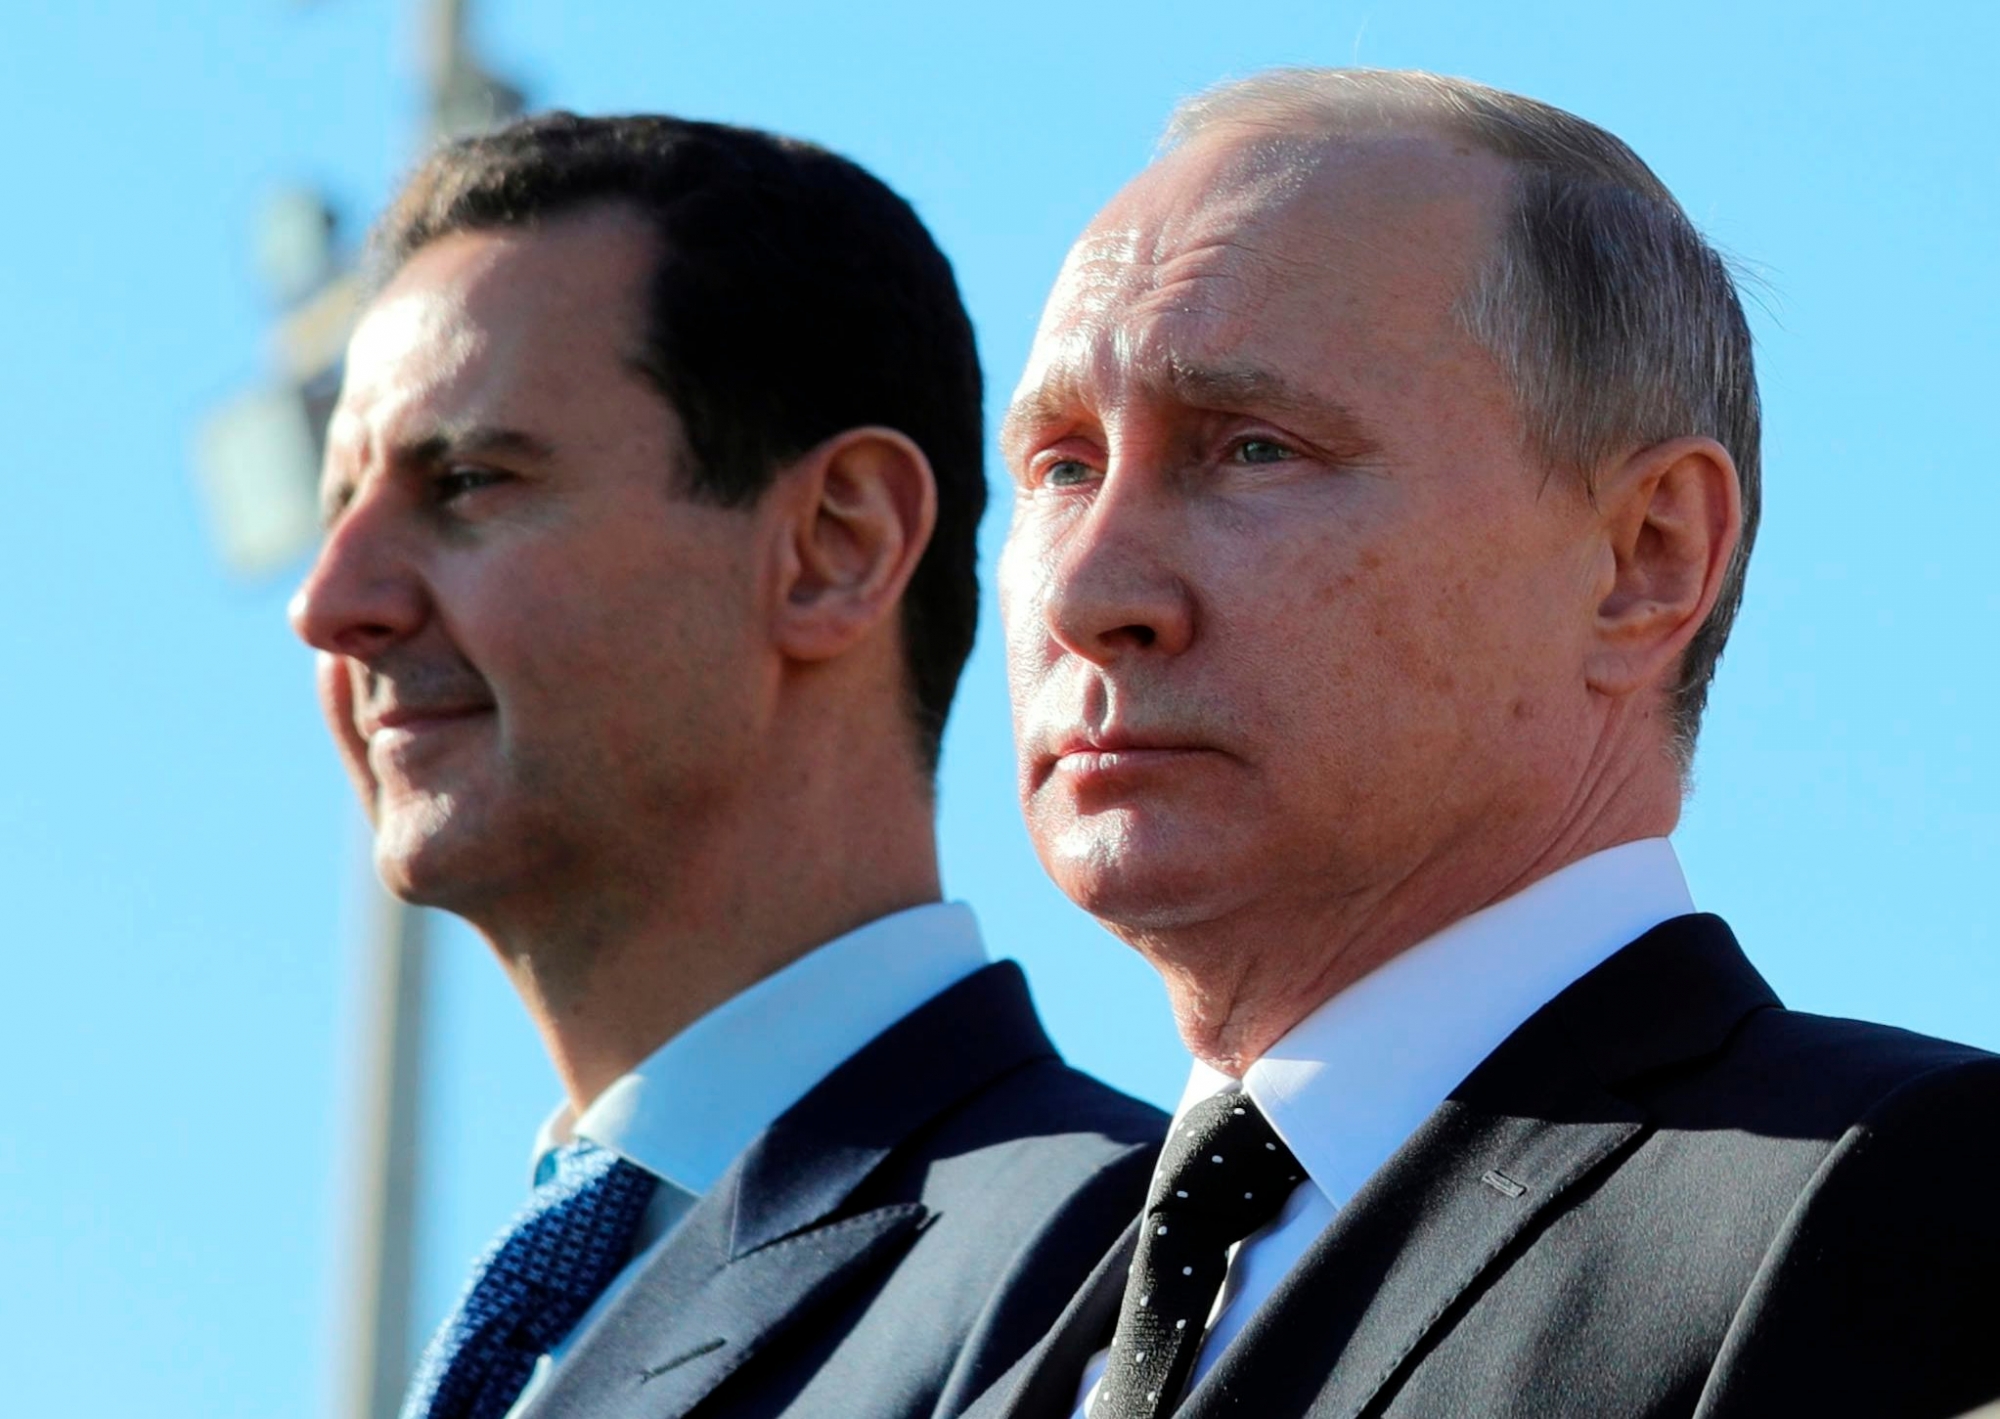 FILE - This Monday, Dec. 11, 2017 file photo, Russian President Vladimir Putin, right, and Syrian President Bashar Assad watch the troops marching at the Hemeimeem air base in Syria. Nearly seven years into the conflict, the war in Syria seems on one level to be winding down, largely because of Russian-backed government victories and local cease-fires aimed at freezing the lines of conflict. (Mikhail Klimentyev, Sputnik, Kremlin Pool Photo via AP, File) Syria Wars End